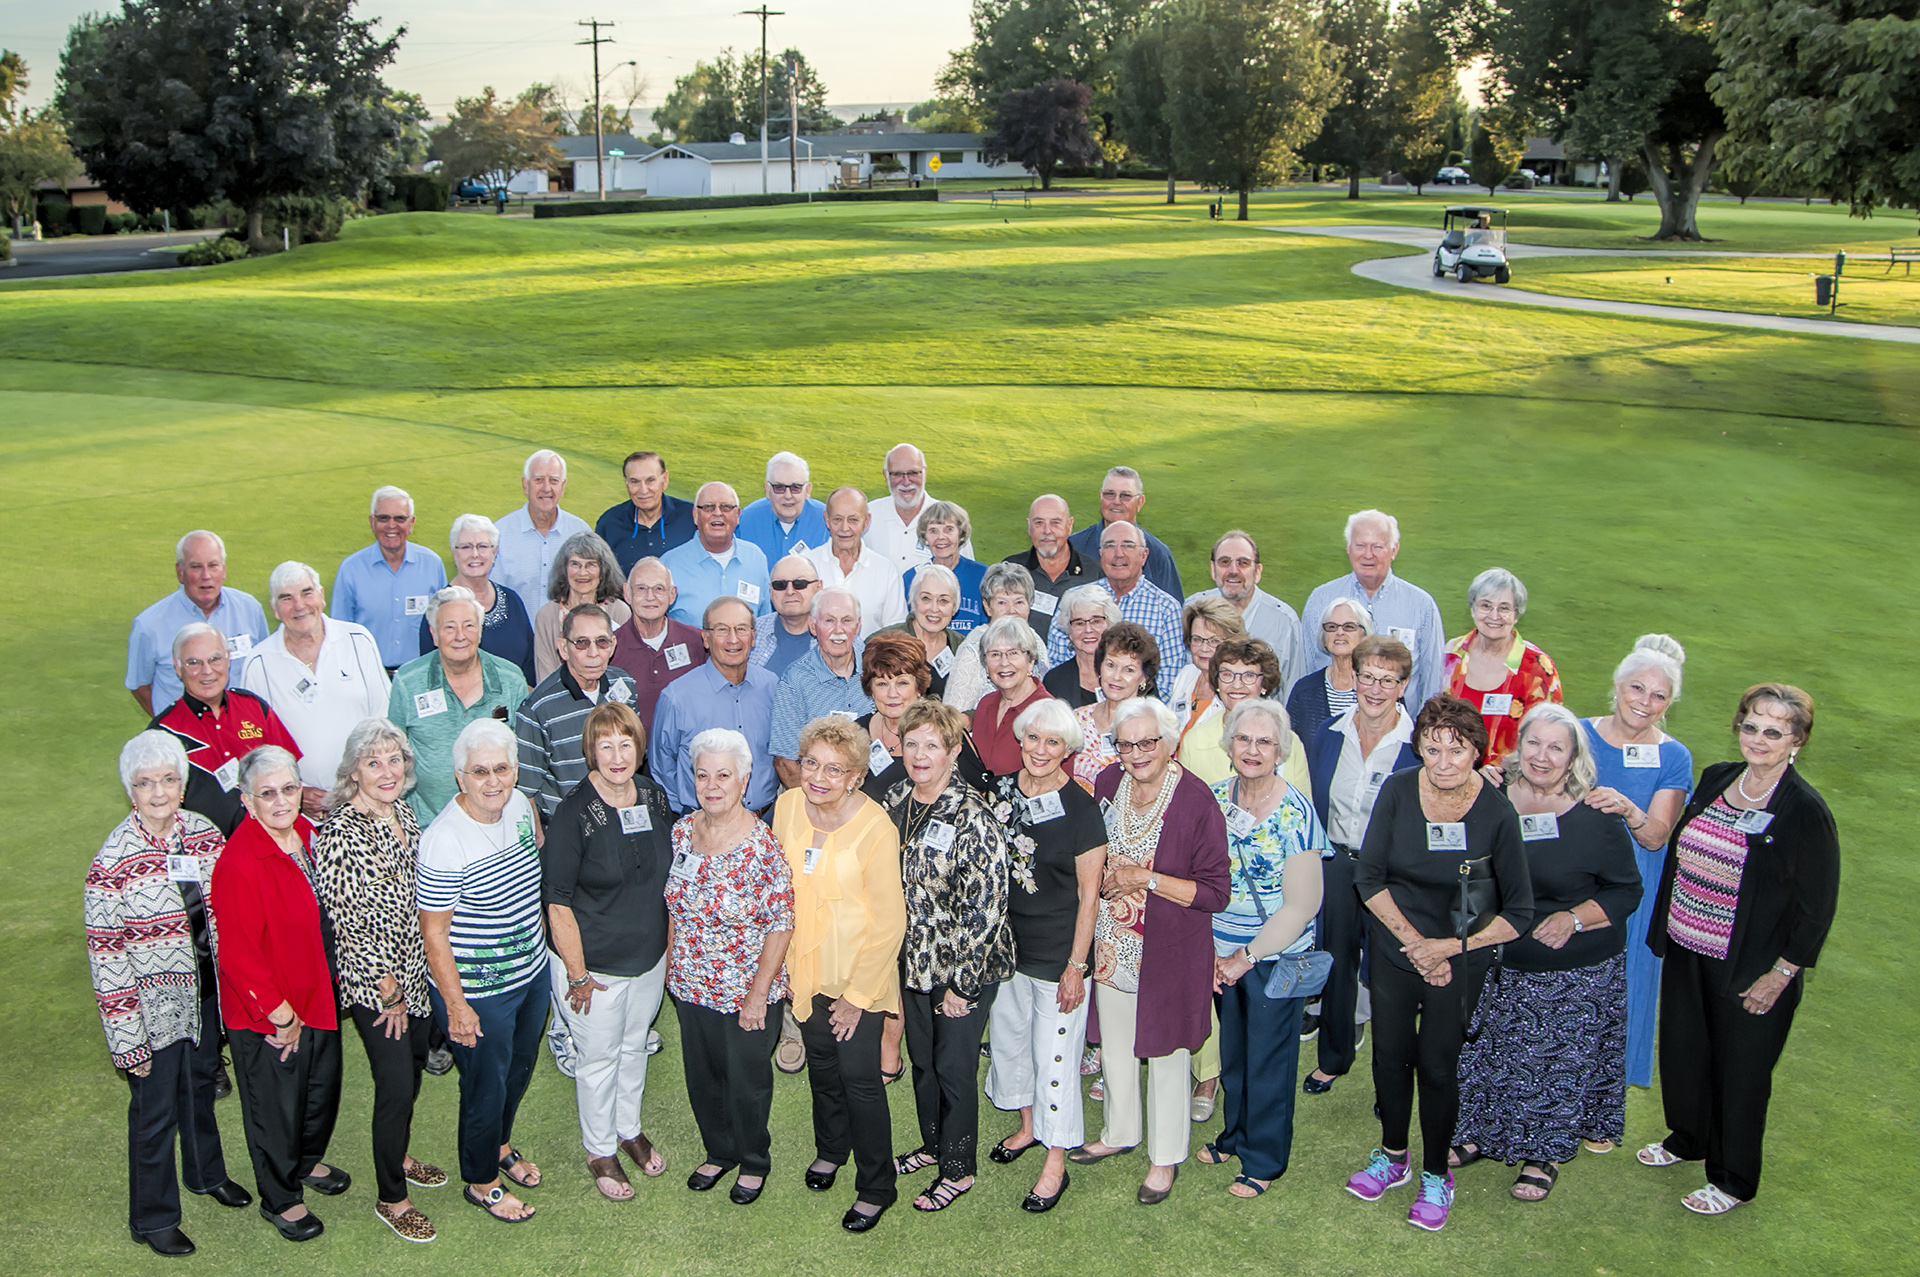 Class of 1959 in 2019 - 
Celebrating 60 Great Years